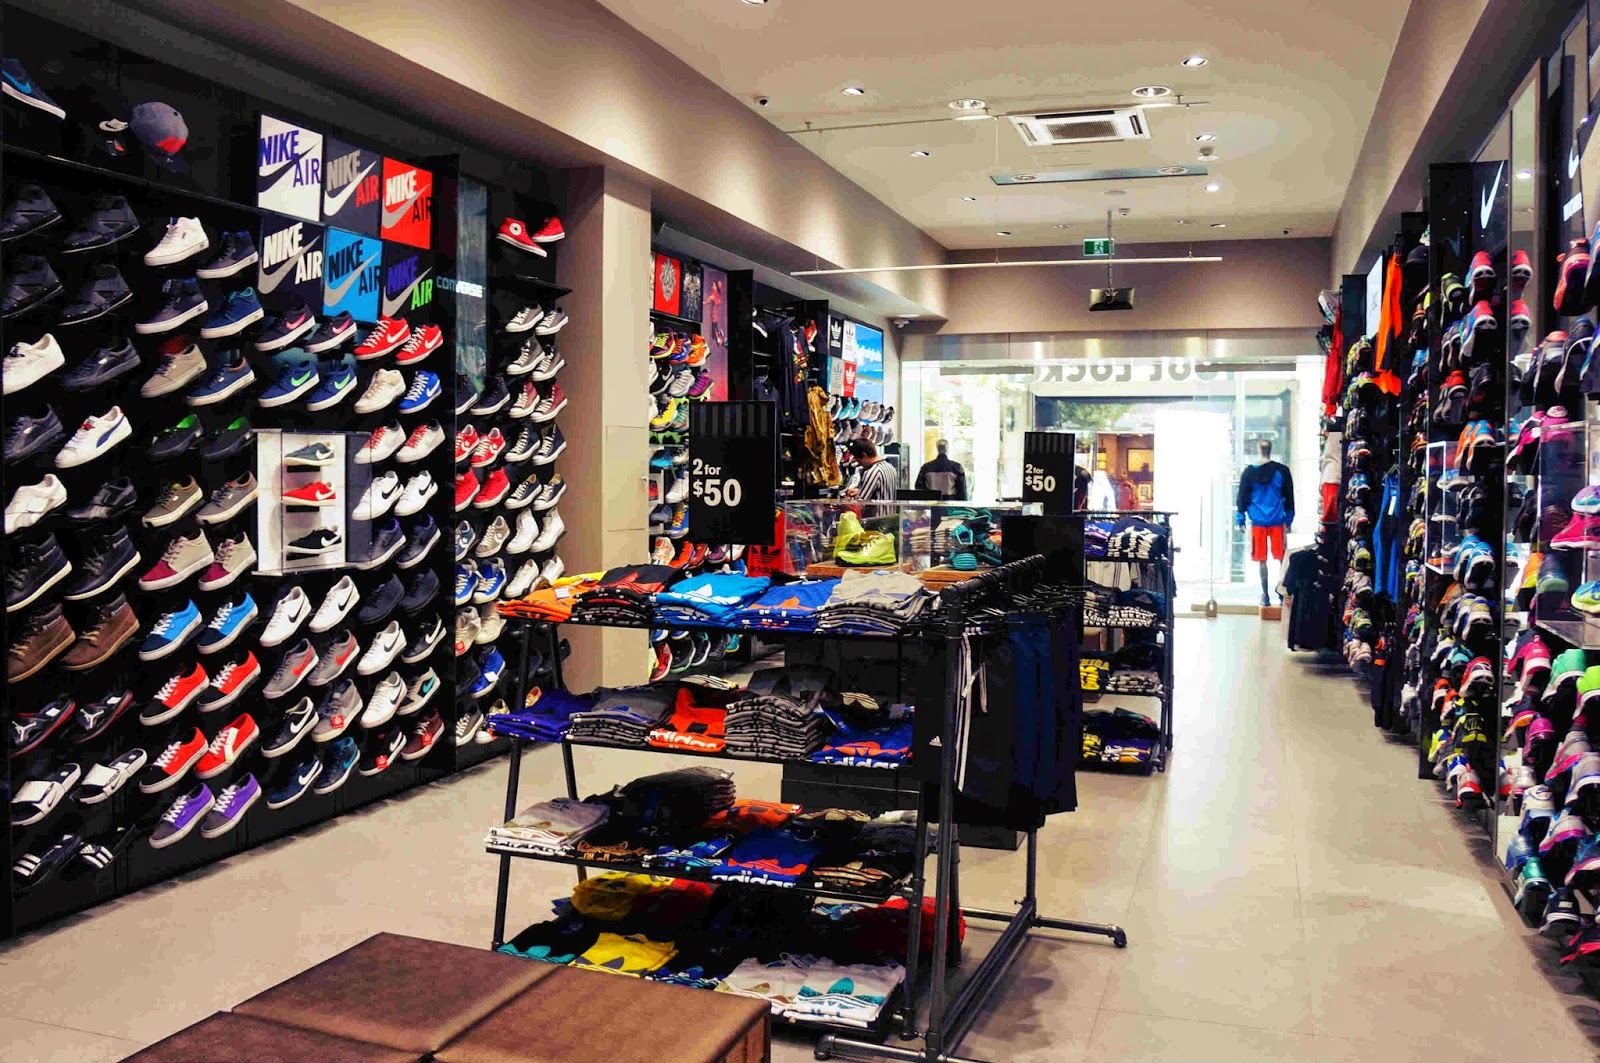 Imagesound blog: Foot Locker Sets the Trend with Chris Matthews